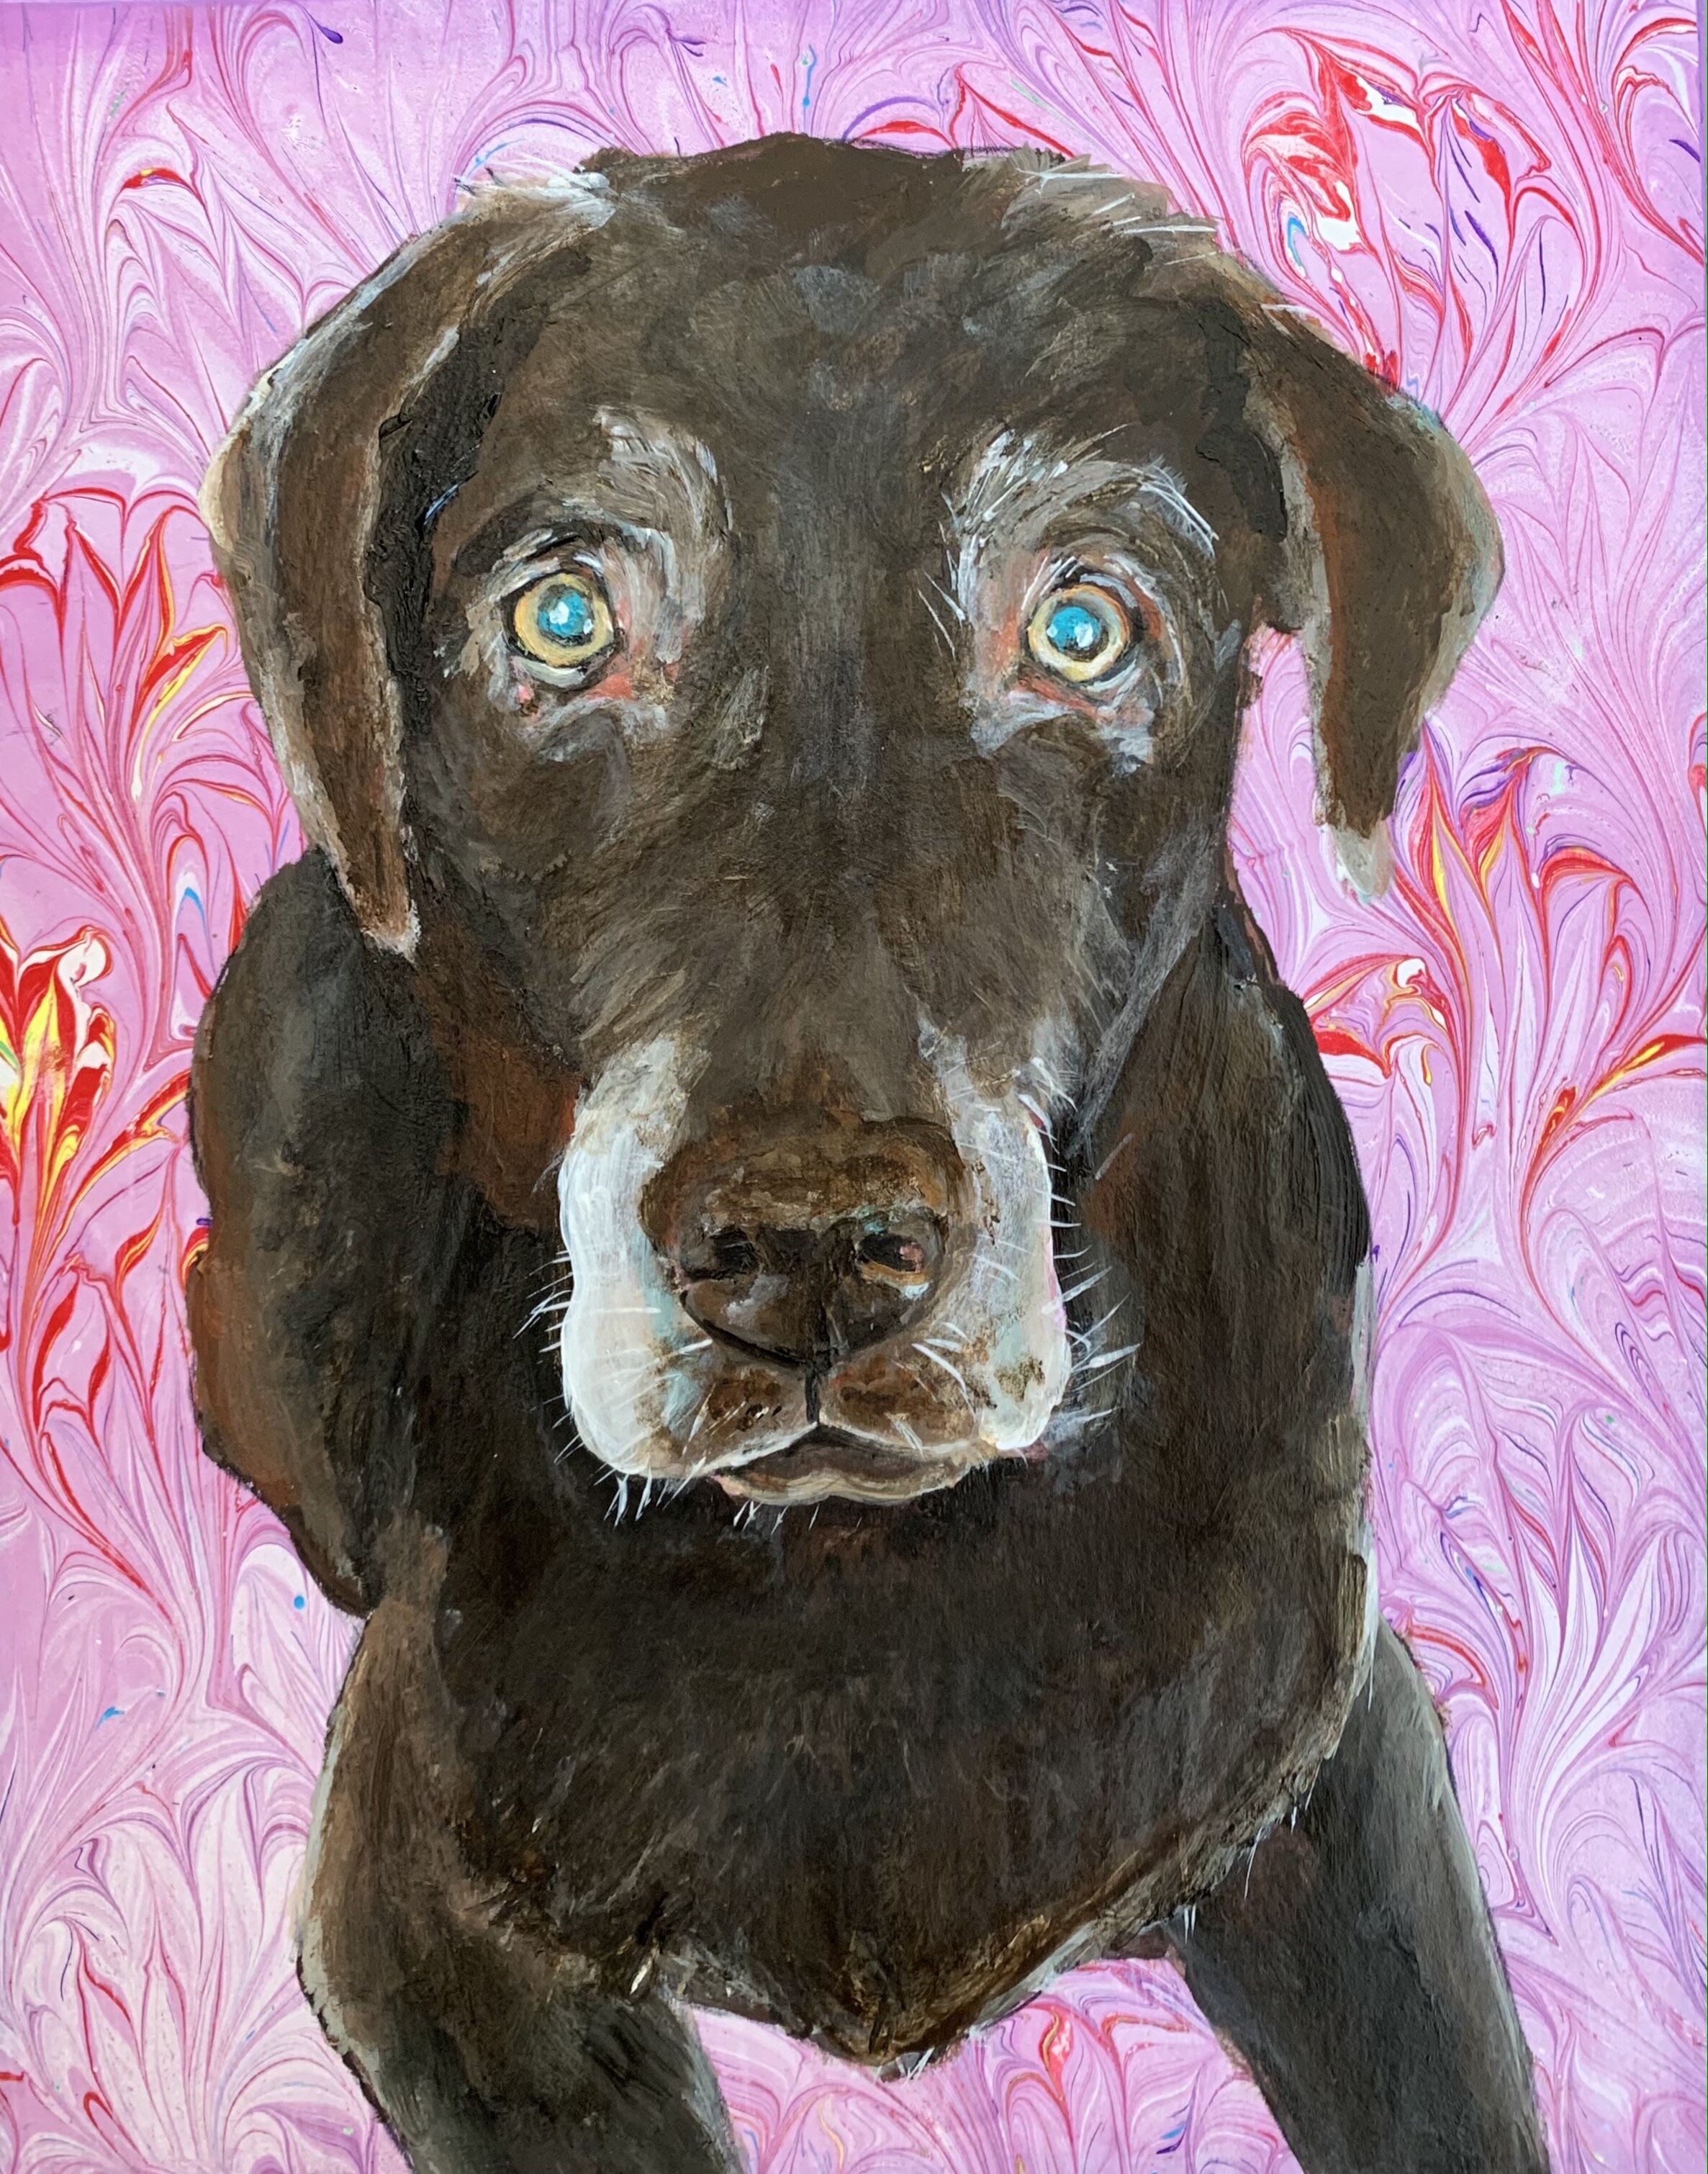 Sophie 8x10 on wood block with marbled paper